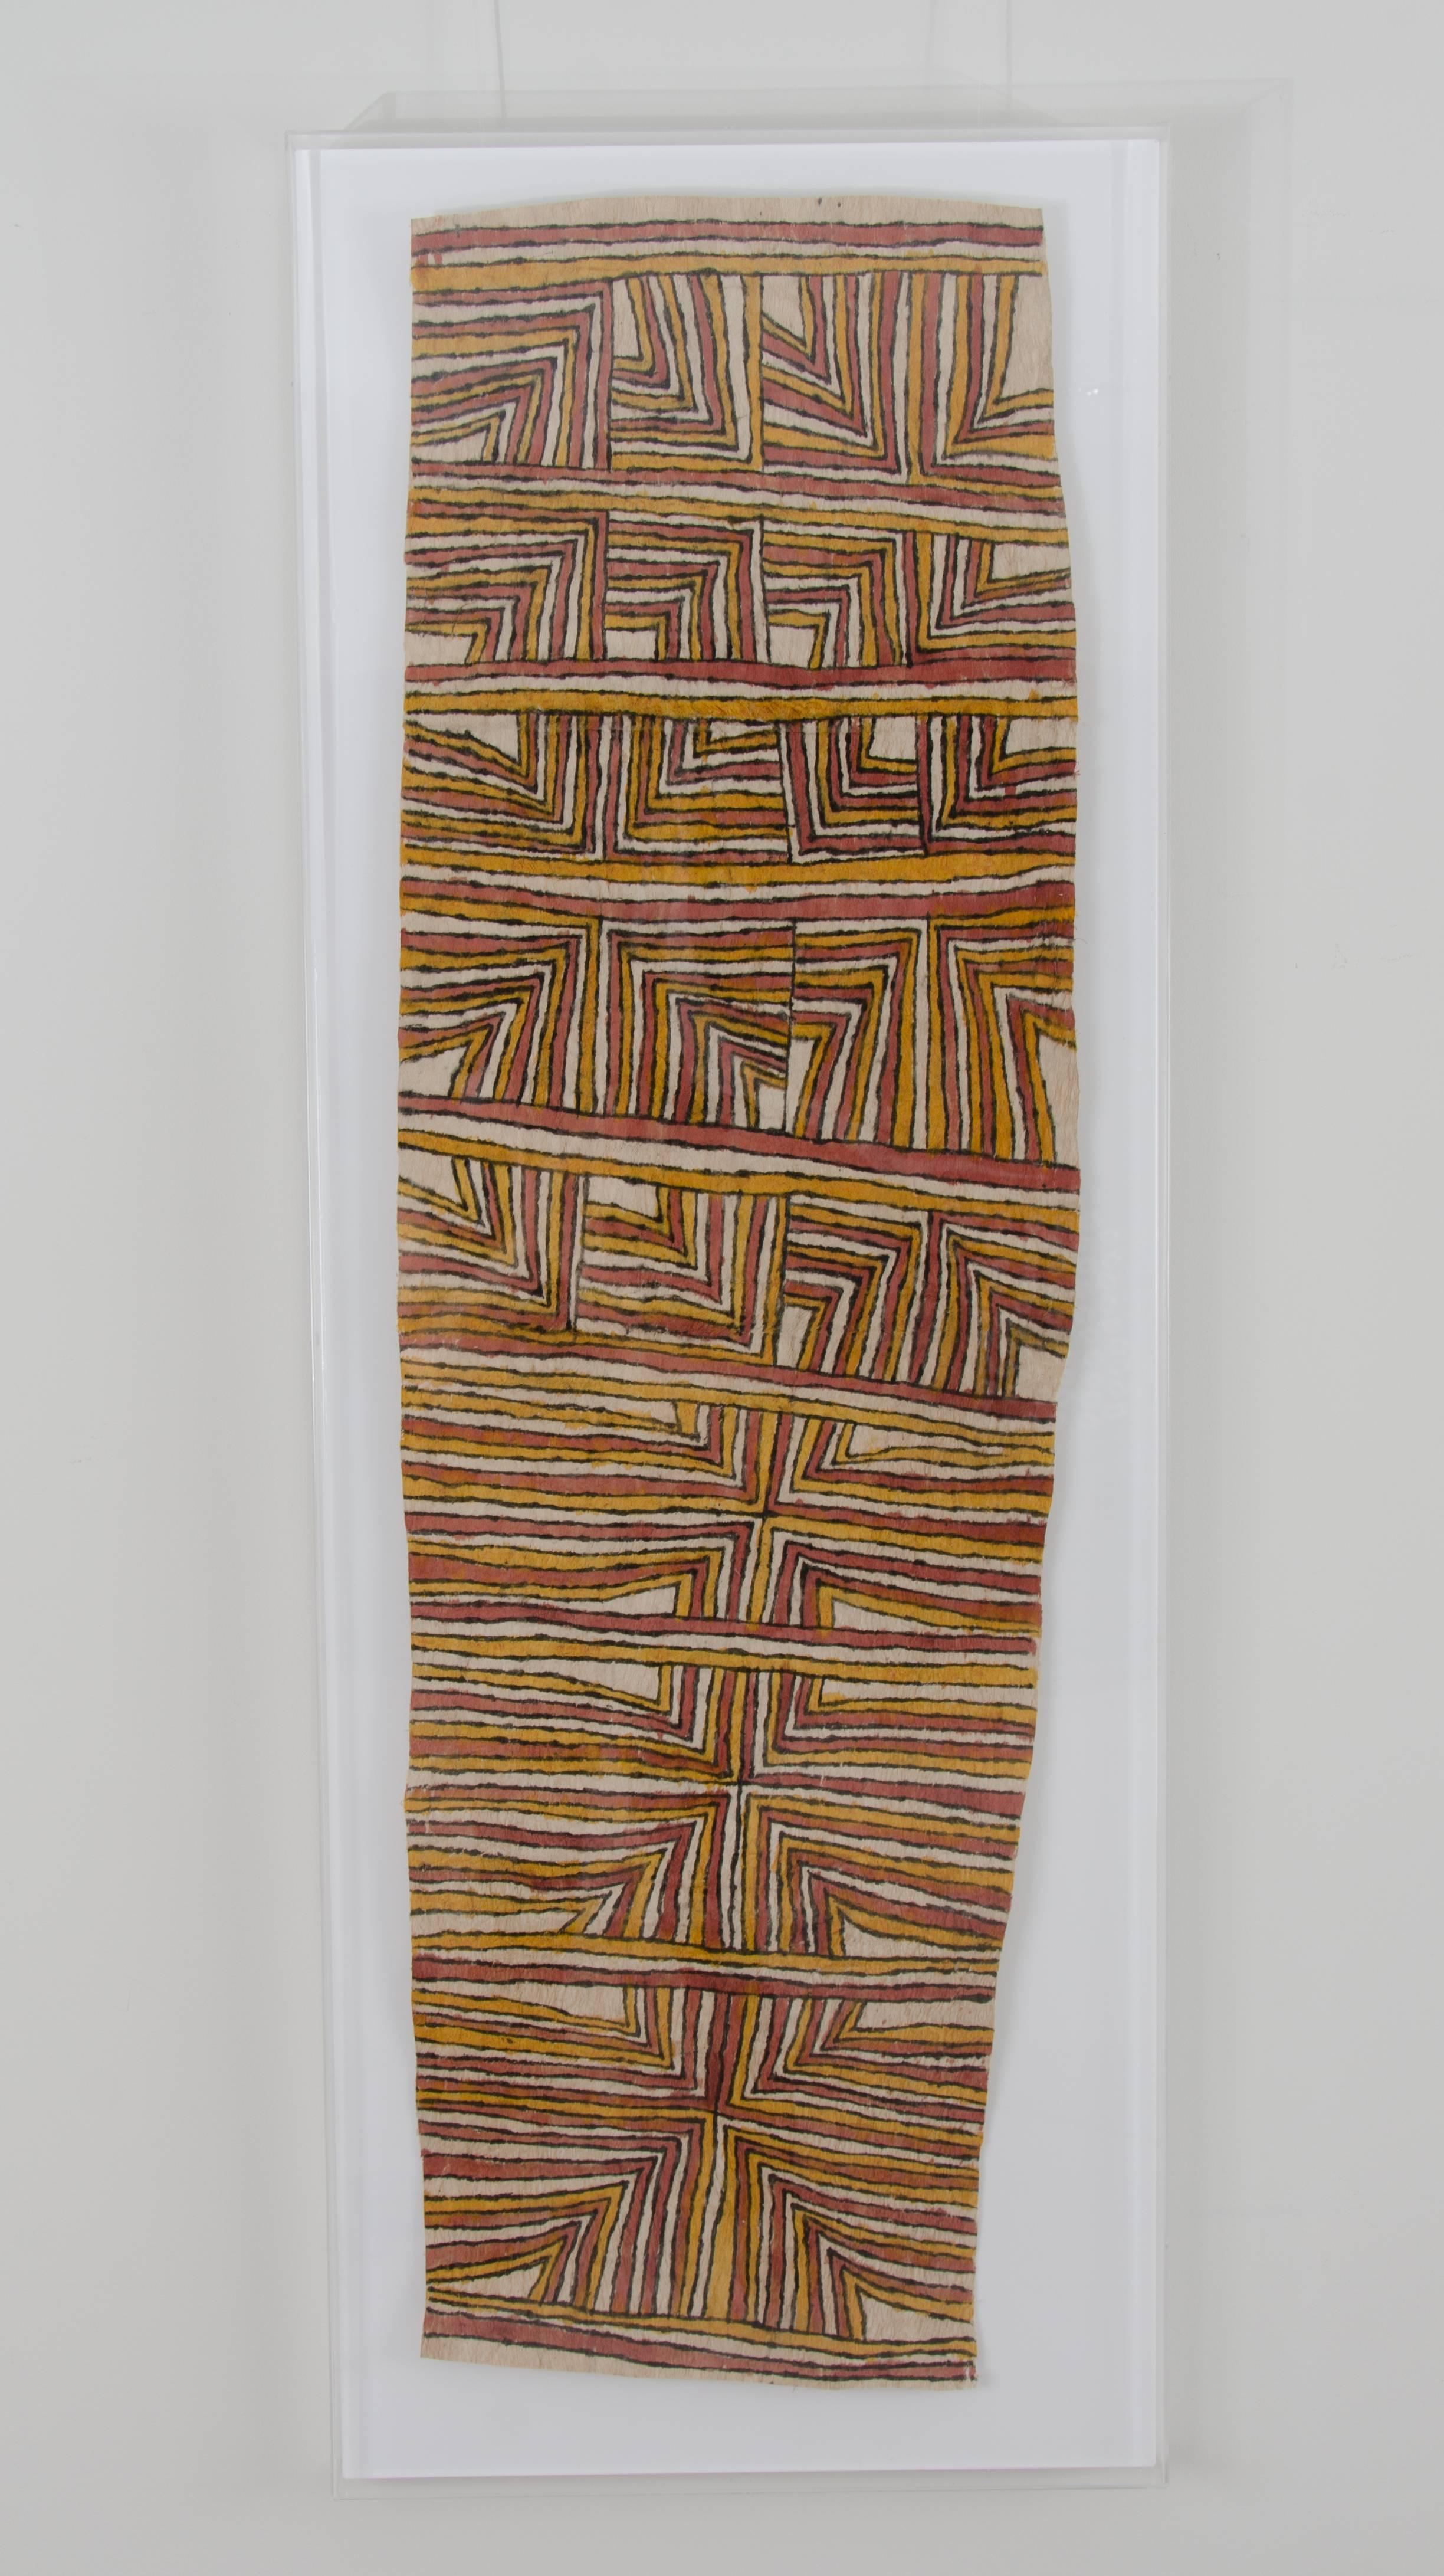 Brenda Kesi - 'Leaves of the Bamboo' - Omie bark cloth.

The work is presented in a clear perspex frame.

Painting on a cloth made from tree bark fibres is a tradition that goes back many thousands of years among the Omie people of Papua New Guinea.